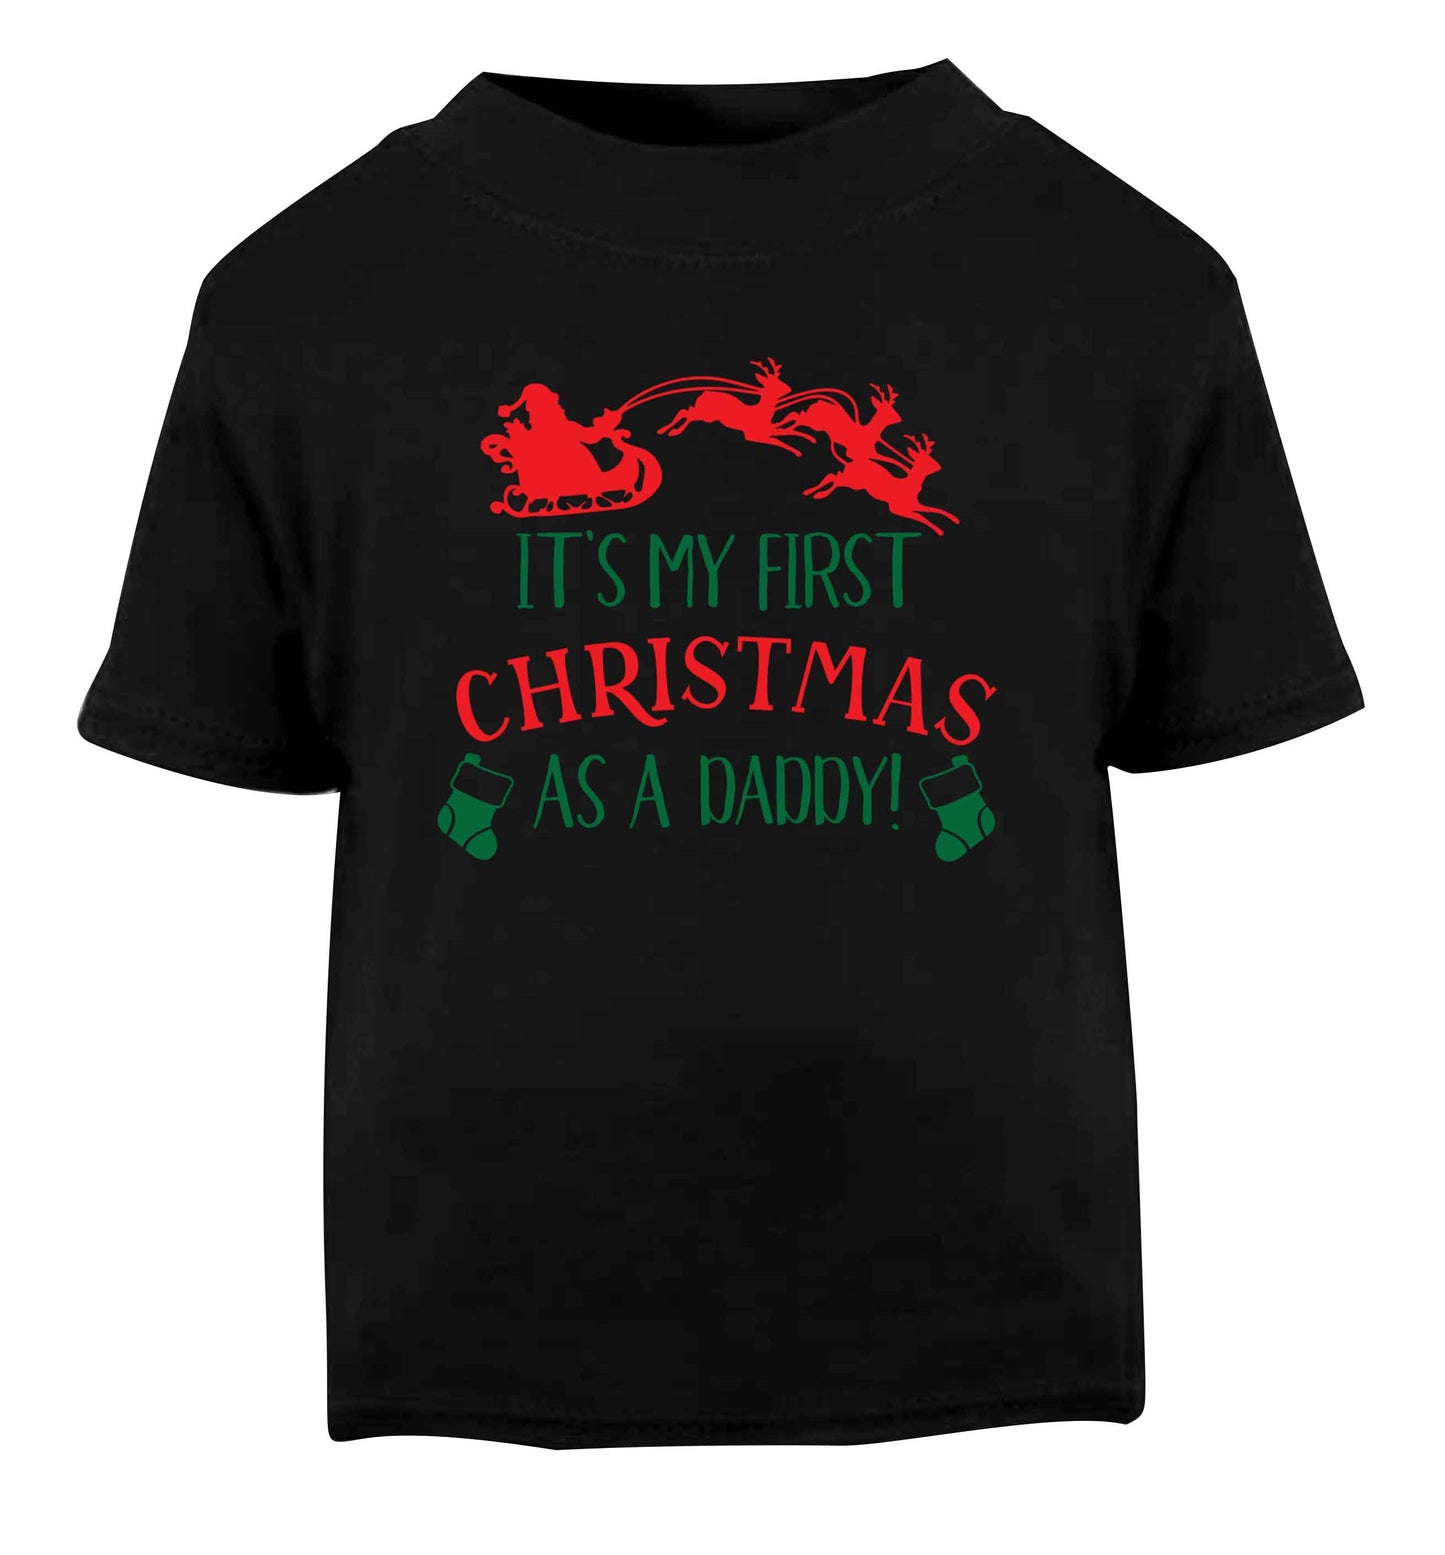 It's my first Christmas as a daddy Black Baby Toddler Tshirt 2 years